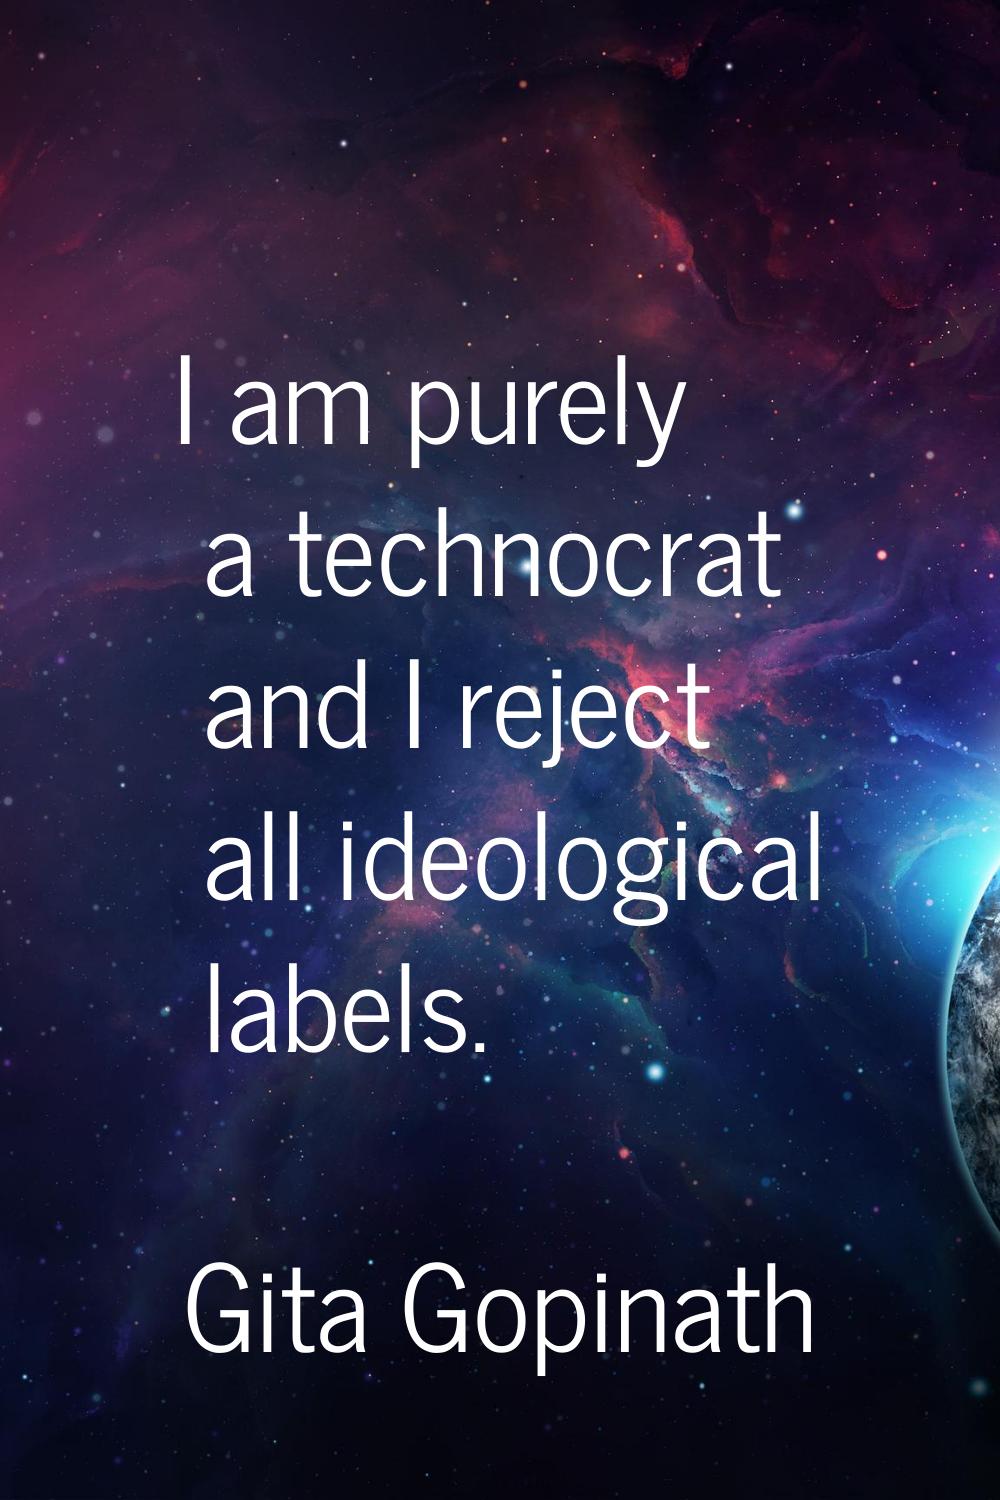 I am purely a technocrat and I reject all ideological labels.